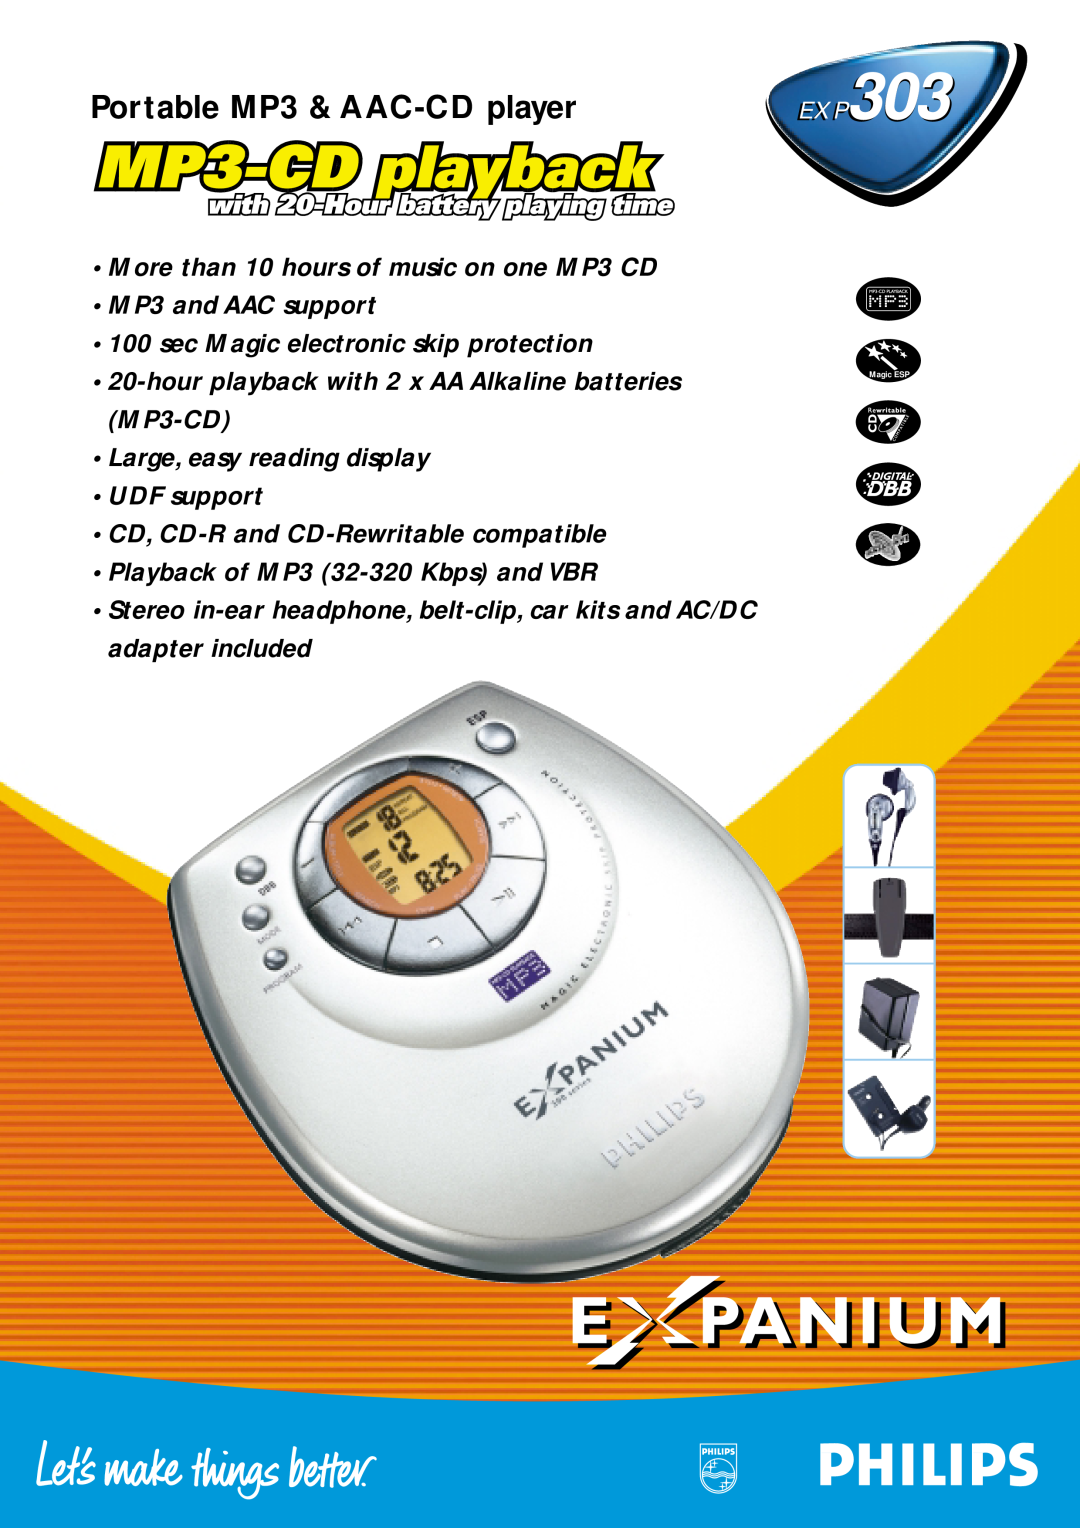 Philips EXP303 manual Portable MP3 & AAC-CD player, More than 10 hours of music on one MP3 CD MP3 and AAC support 